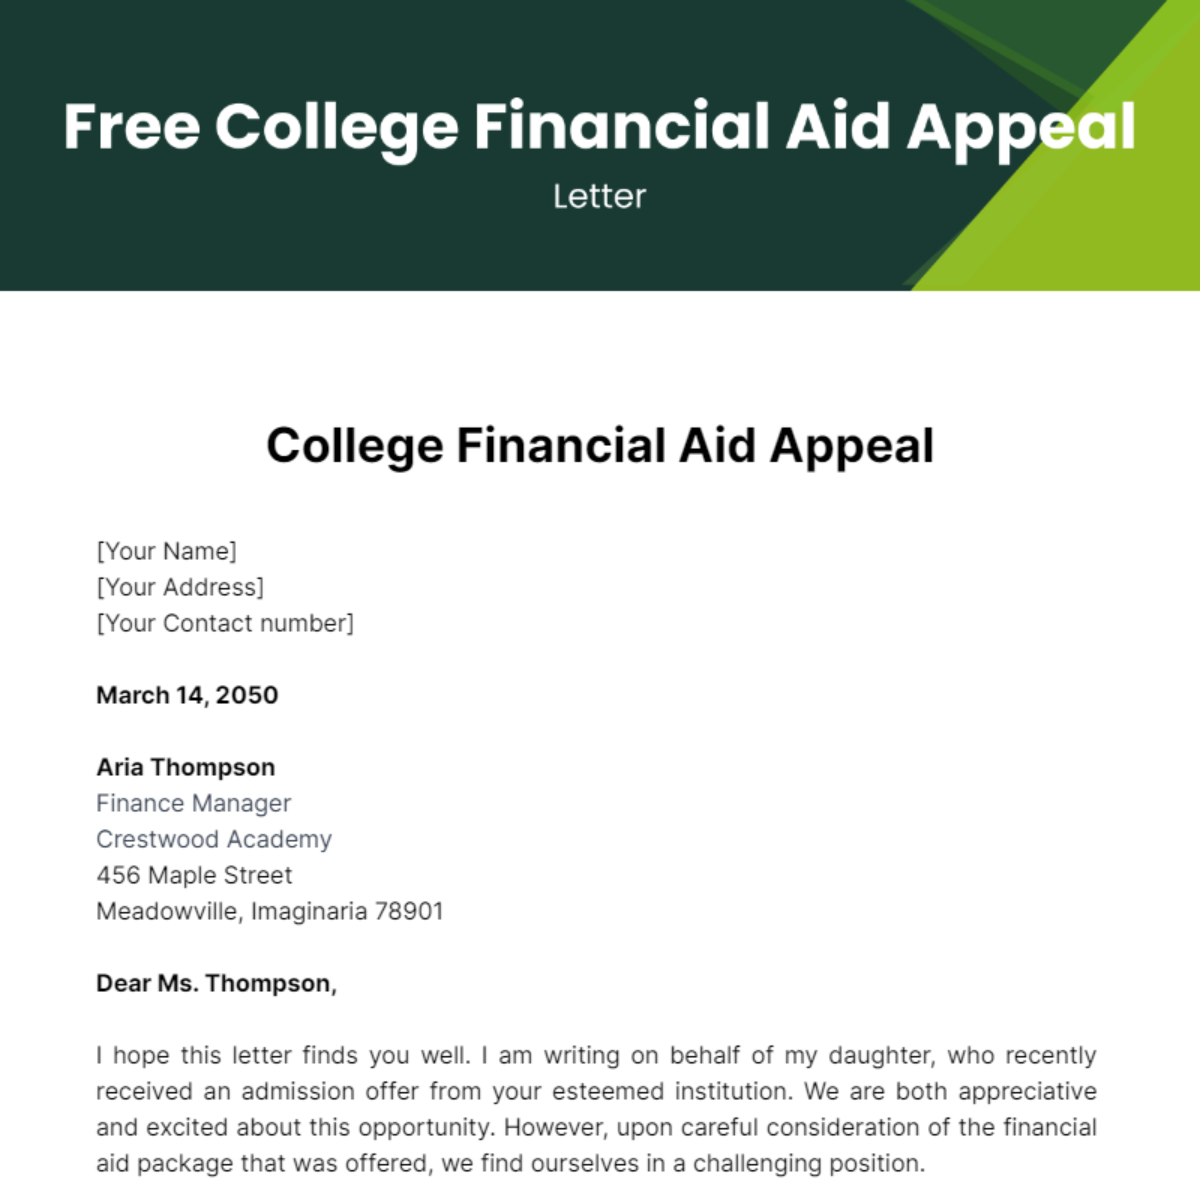 Free College Financial Aid Appeal Letter Template